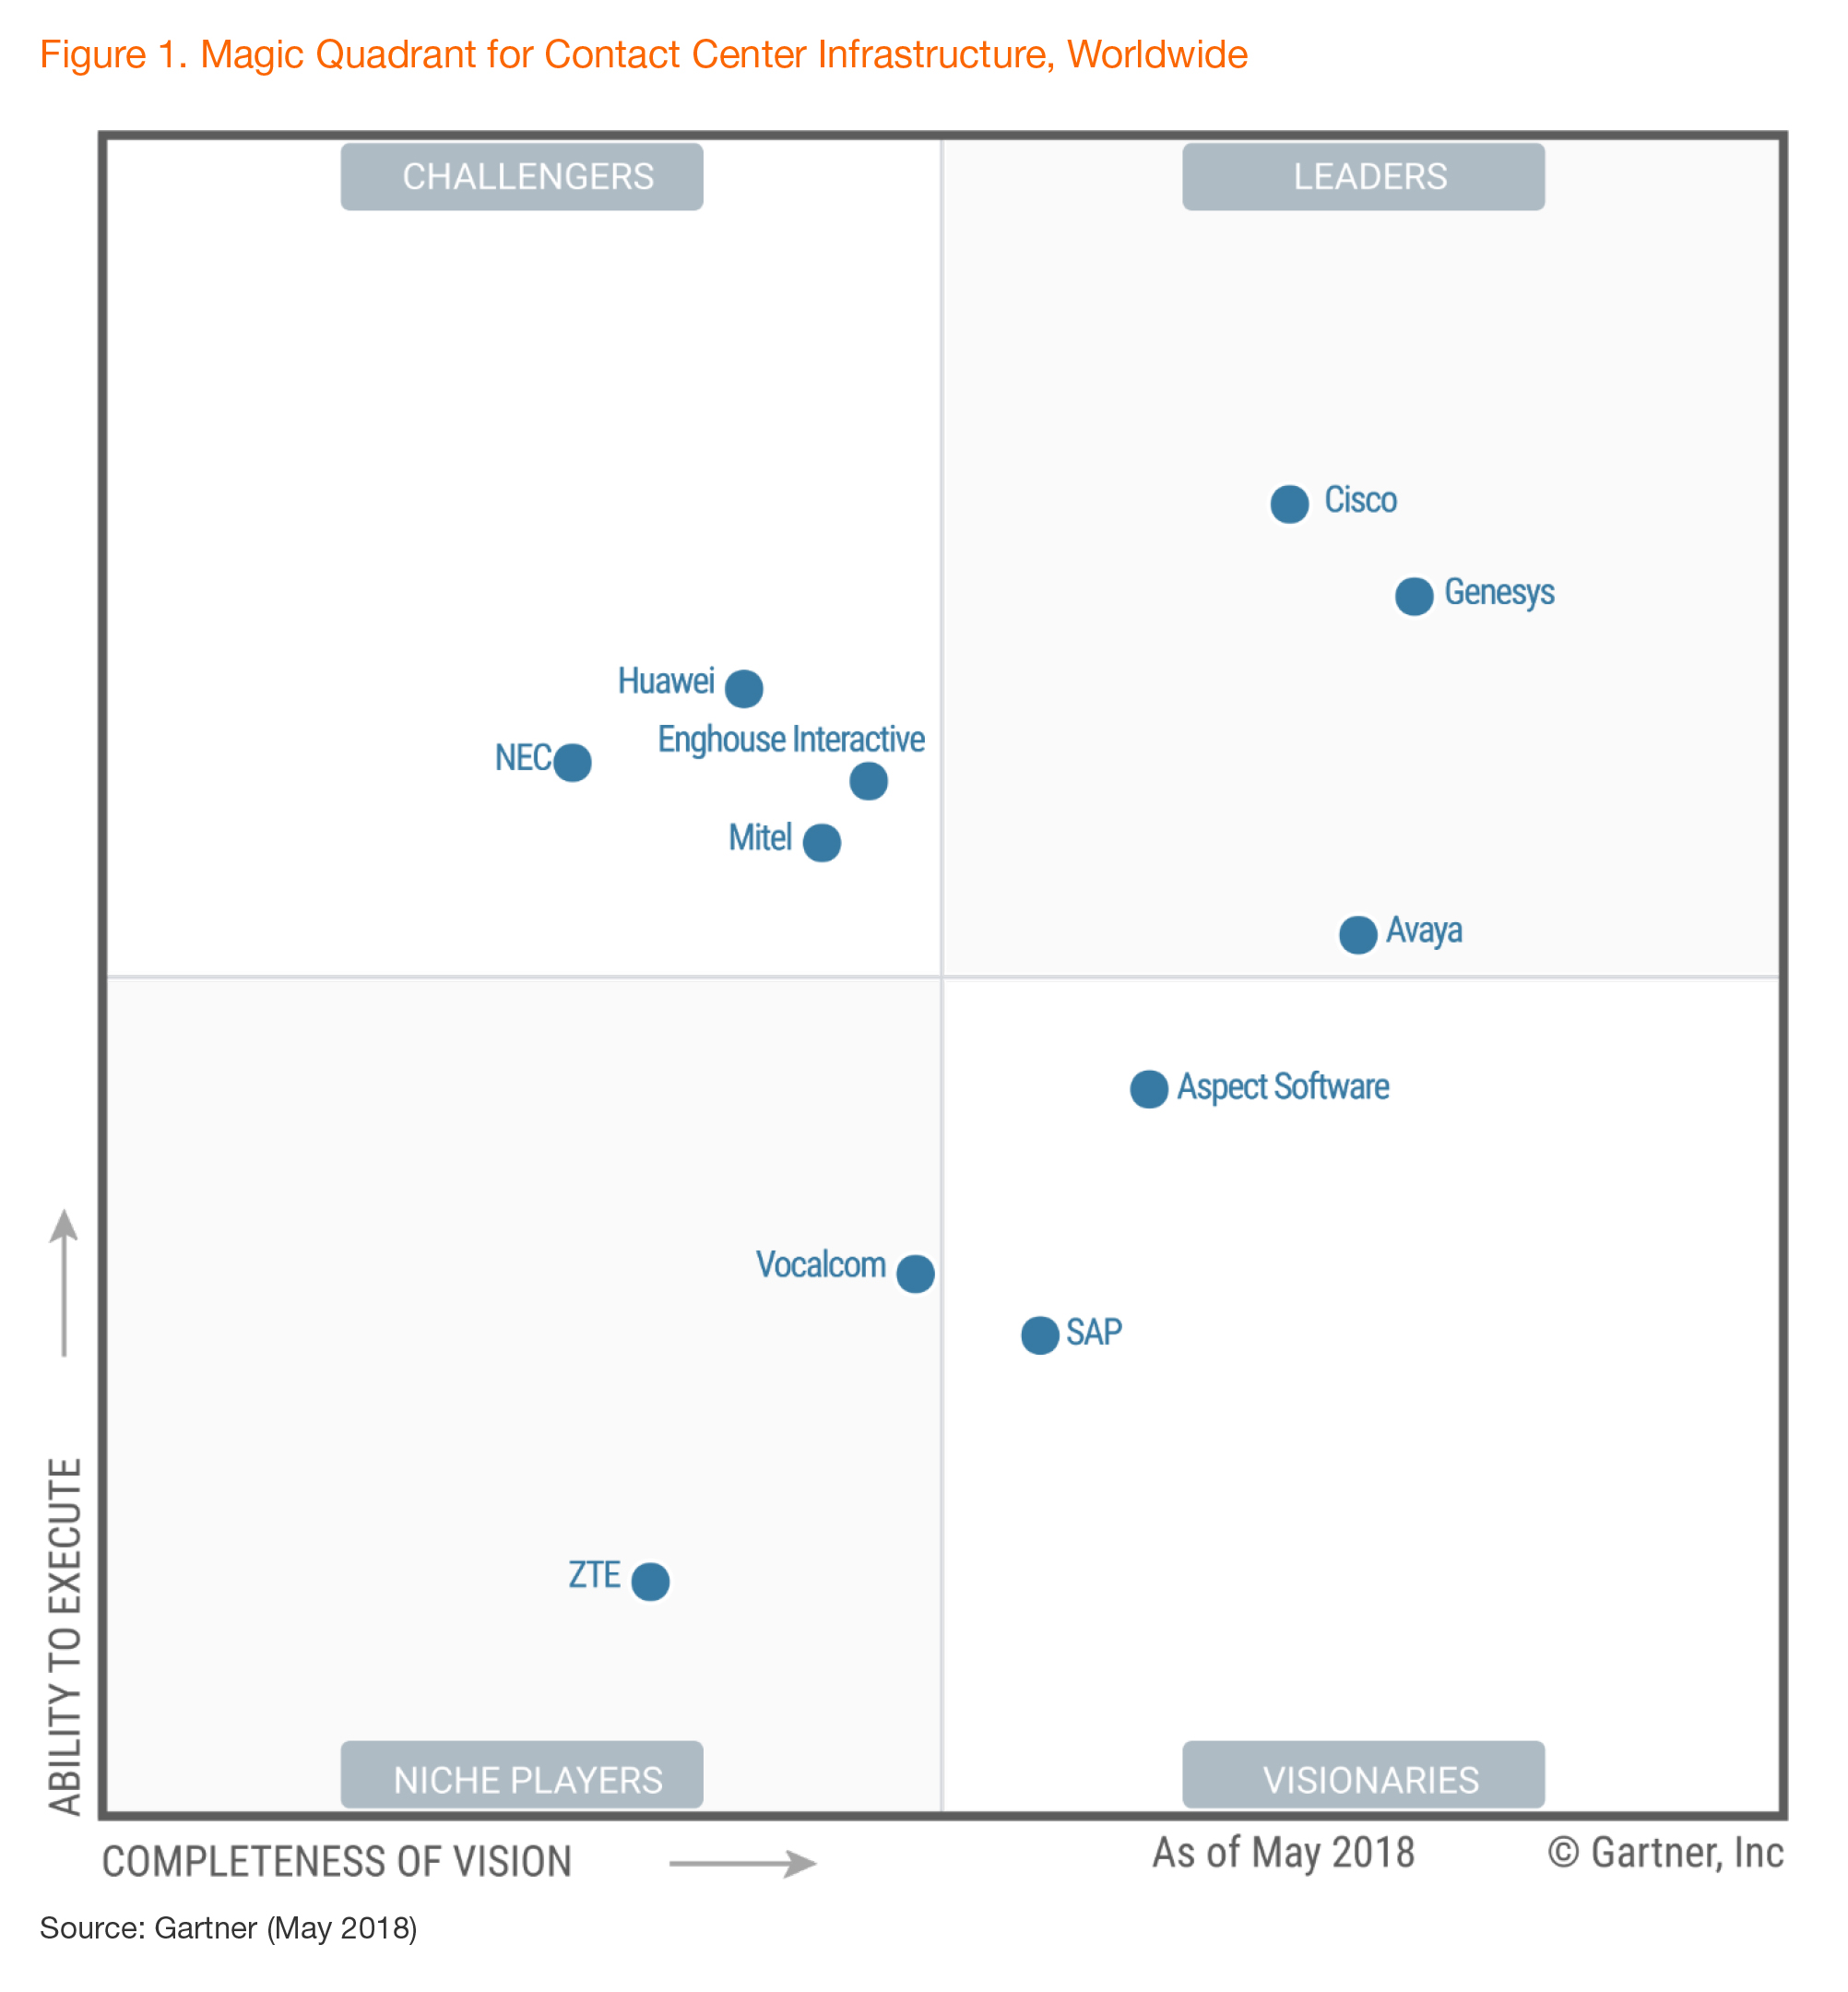 Magic Quadrant for Contact Center Infrastructure, Worldwide